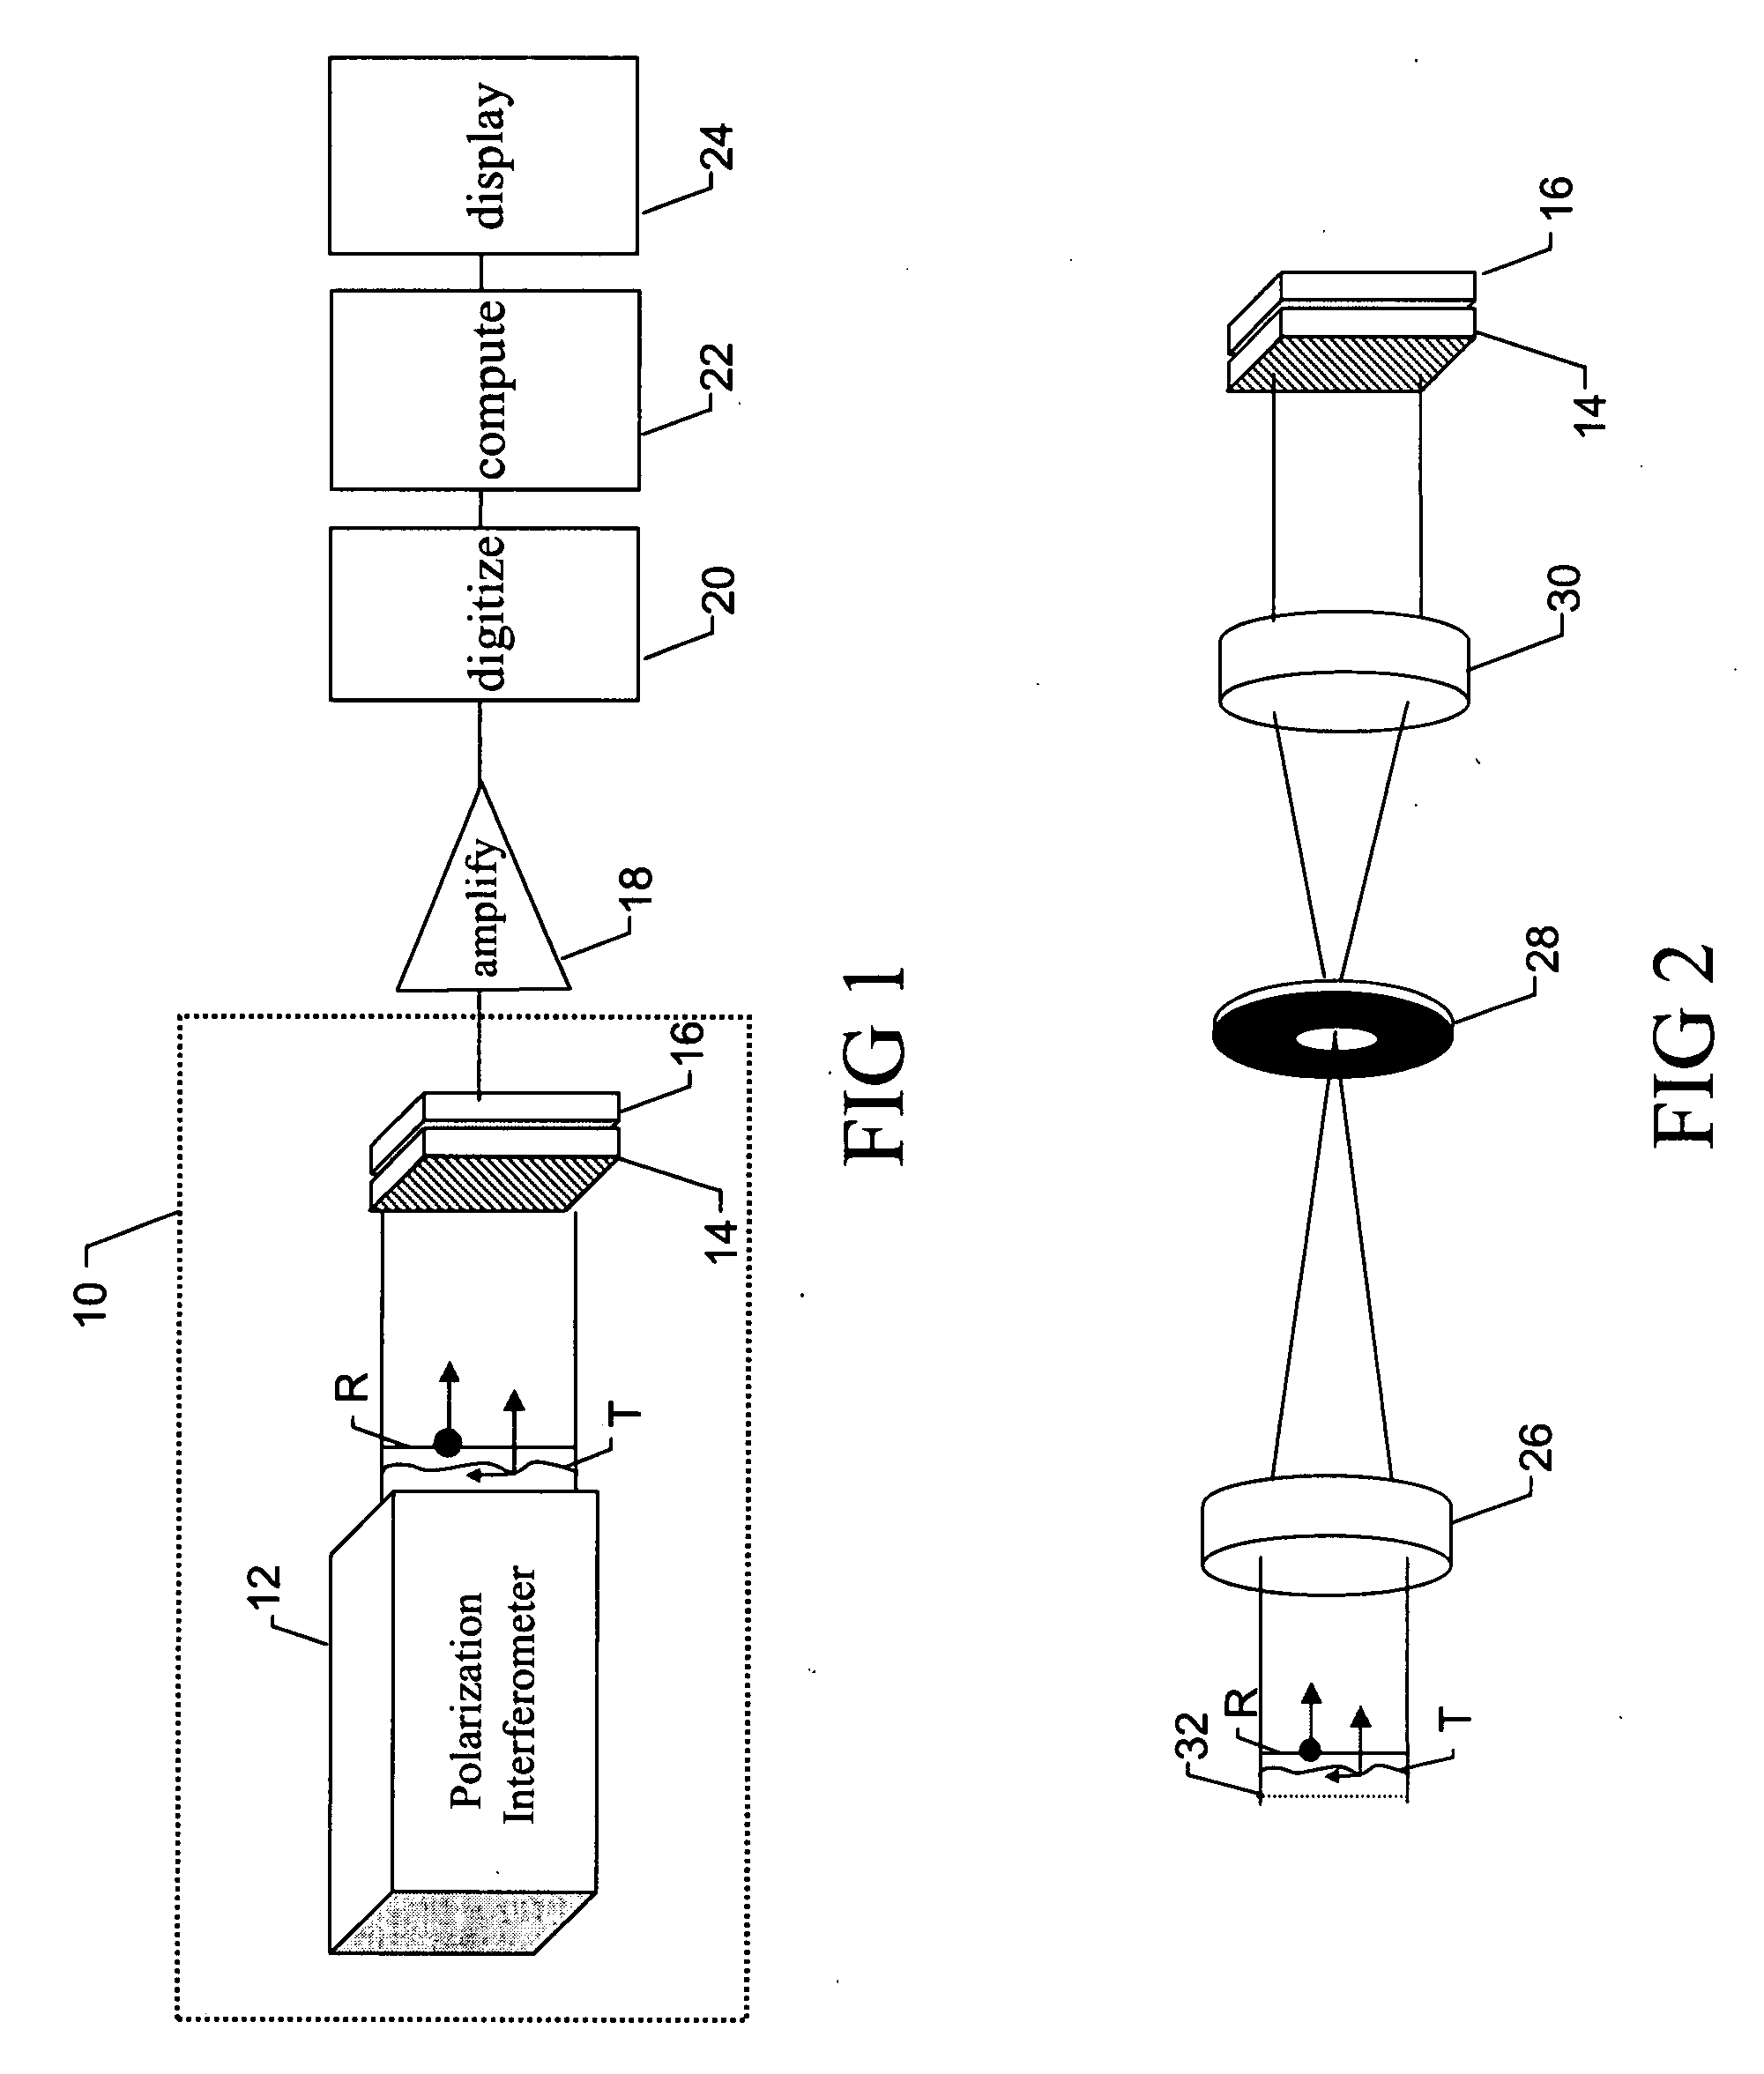 Linear-carrier phase-mask interferometer